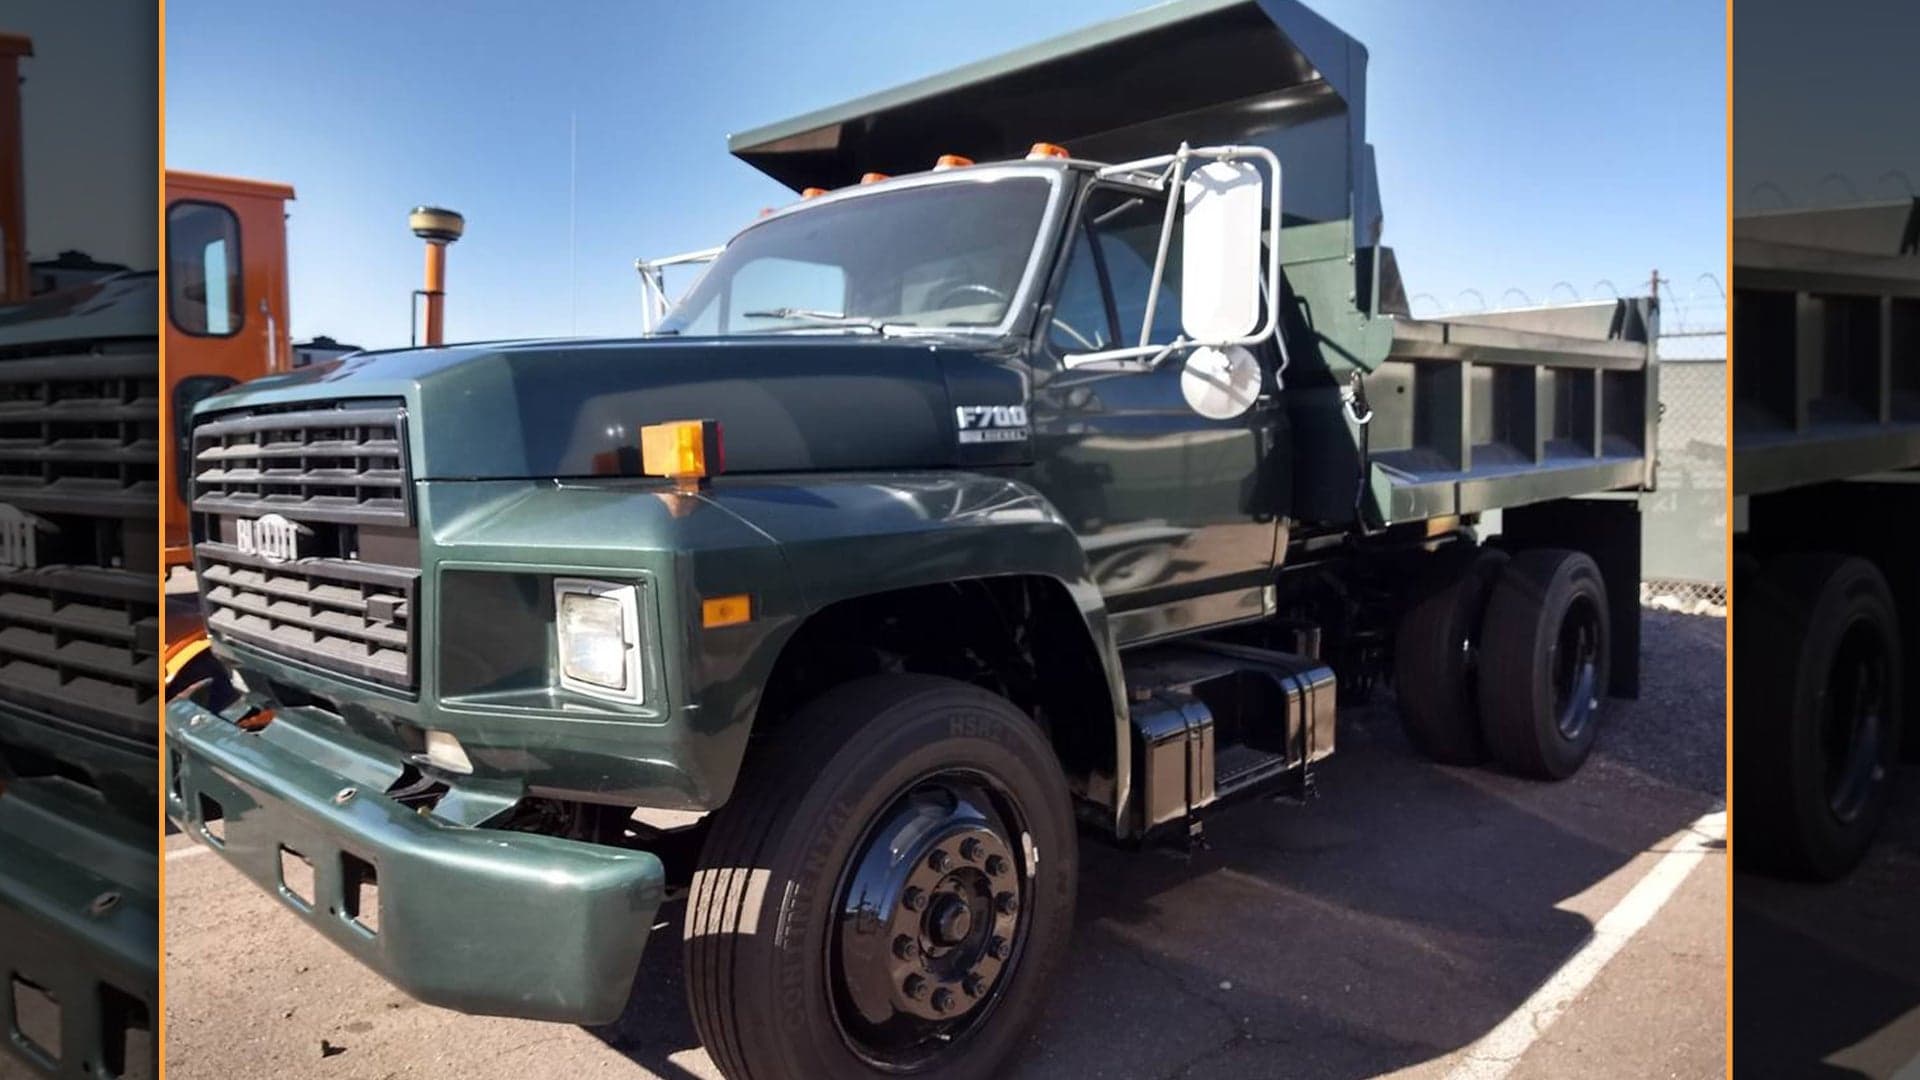 This Bullitt-Tribute Ford F700 Dump Truck Would’ve Made For a Very Different Chase Scene